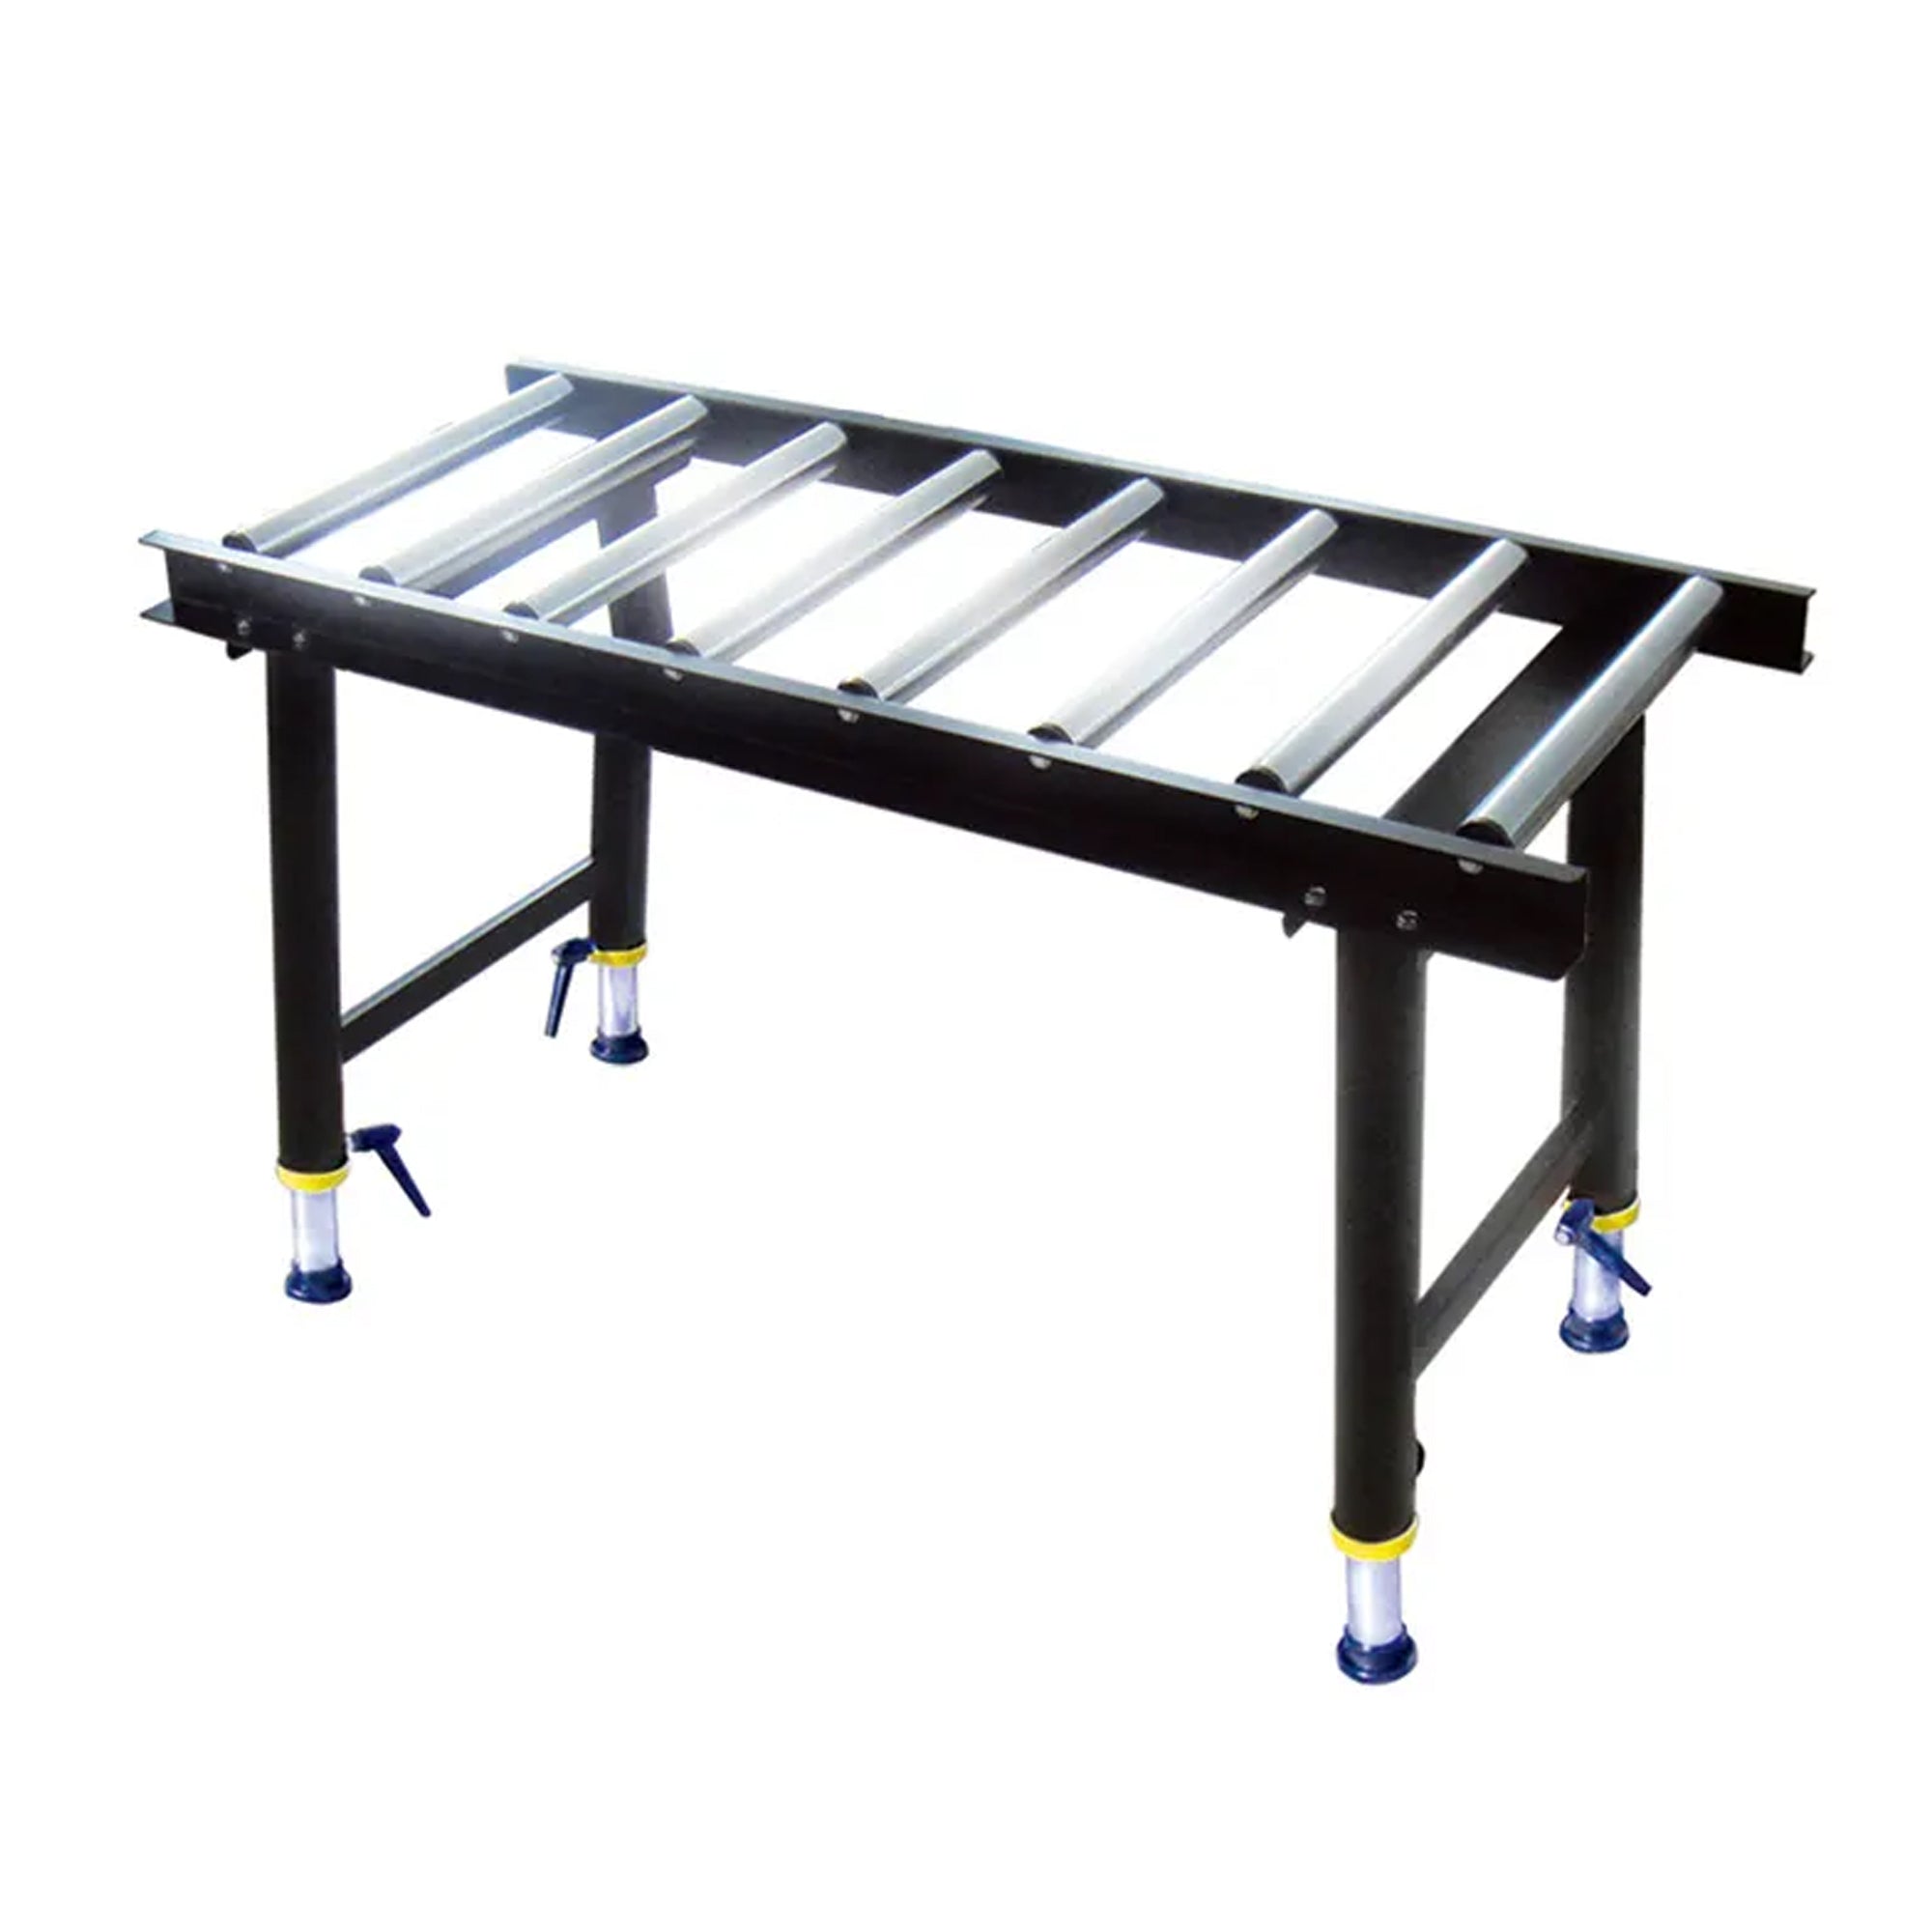 1200mm x 465mm x 650-1100mm H Heavy Duty Roller Support Conveyor Stand 26124A by Oltre